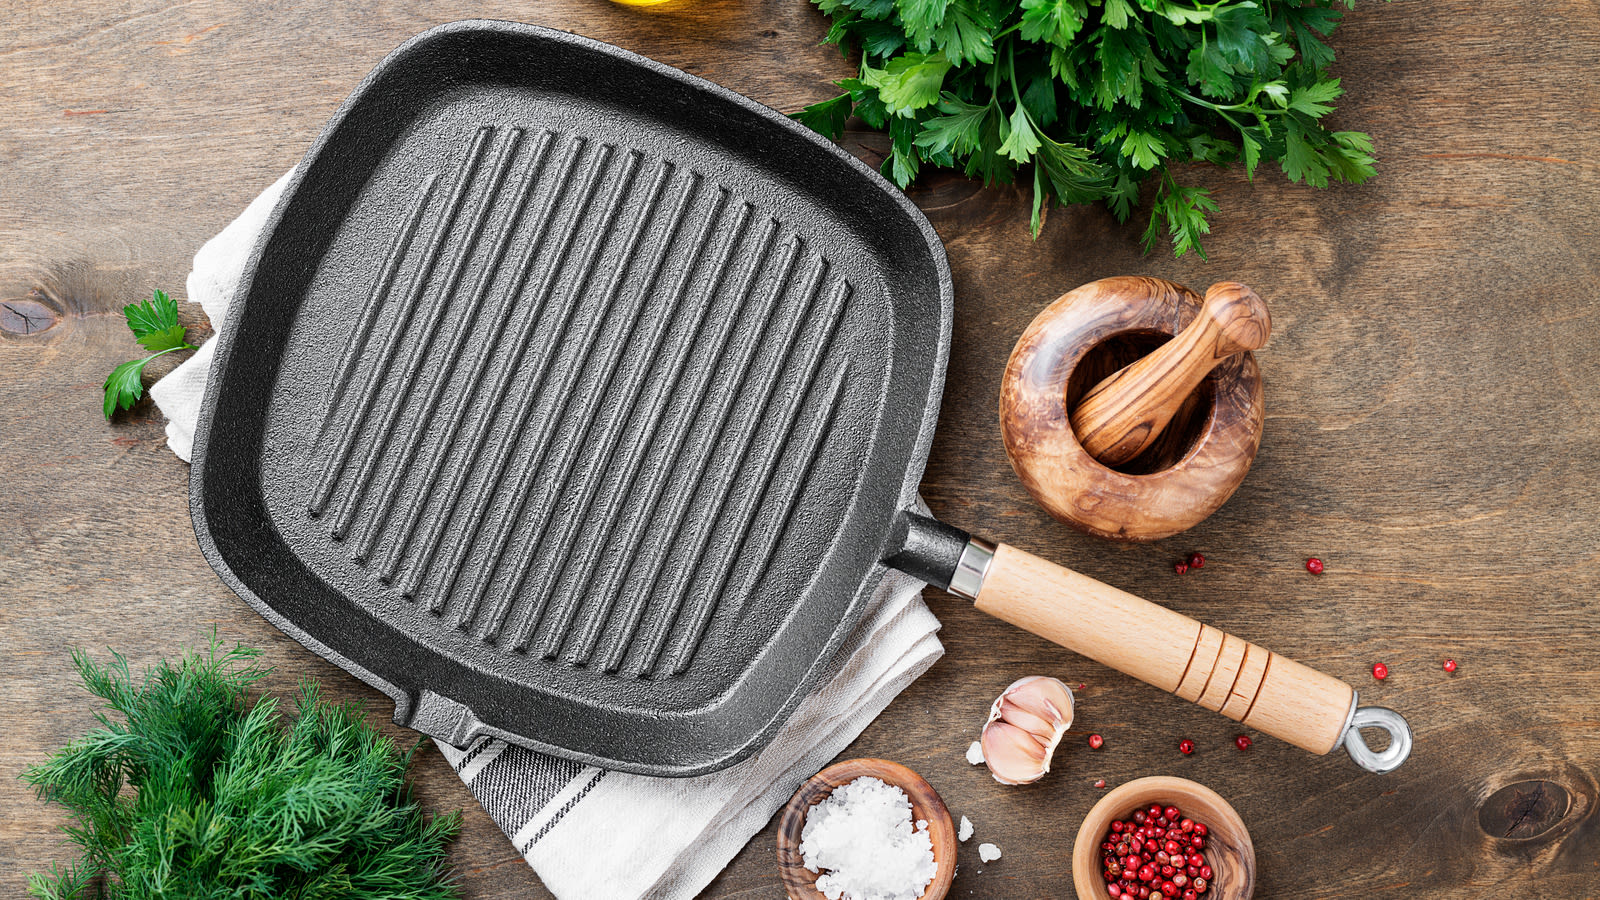 Chef Reveals Big Mistakes Everyone Makes Cooking On A Cast Iron Griddle